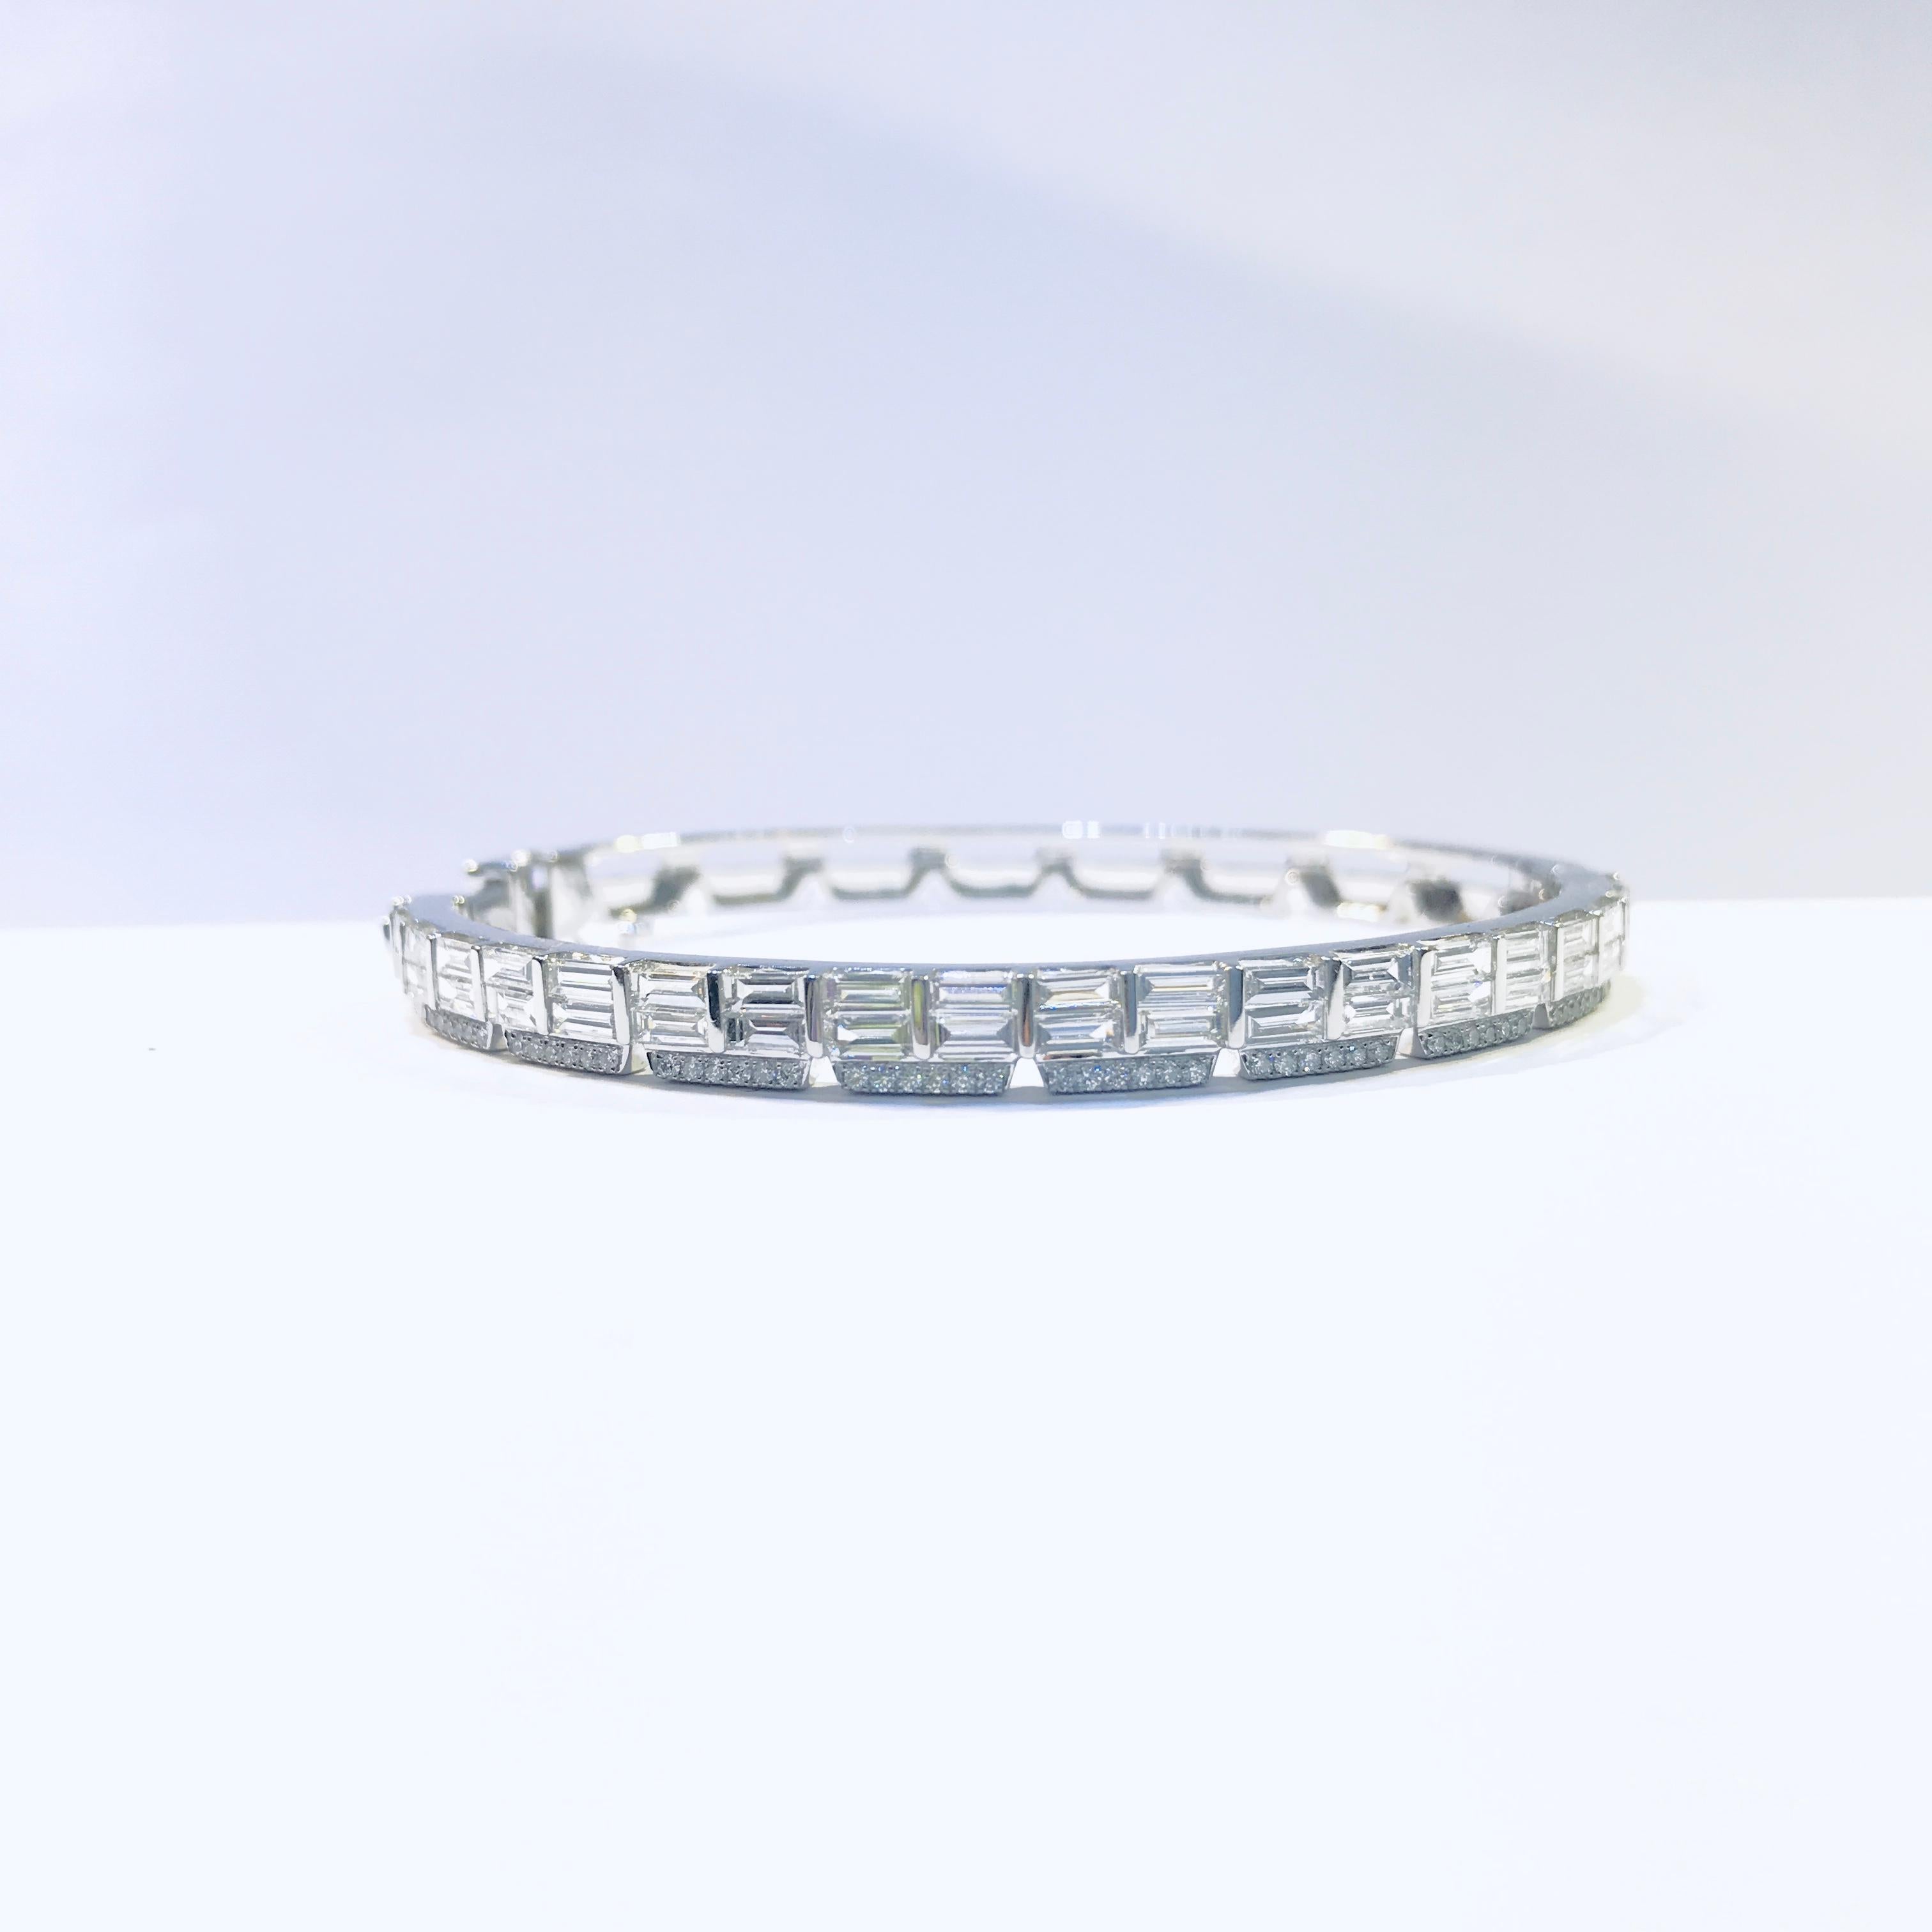 Bricks collection- Chic and simple, a jewellery for modern ladies,baguette cut diamonds are like bricks , putting together forms a unique bangle. Each baguette diamond has special luster, reflection.  very unique and special!

Height: 4.87 mm /